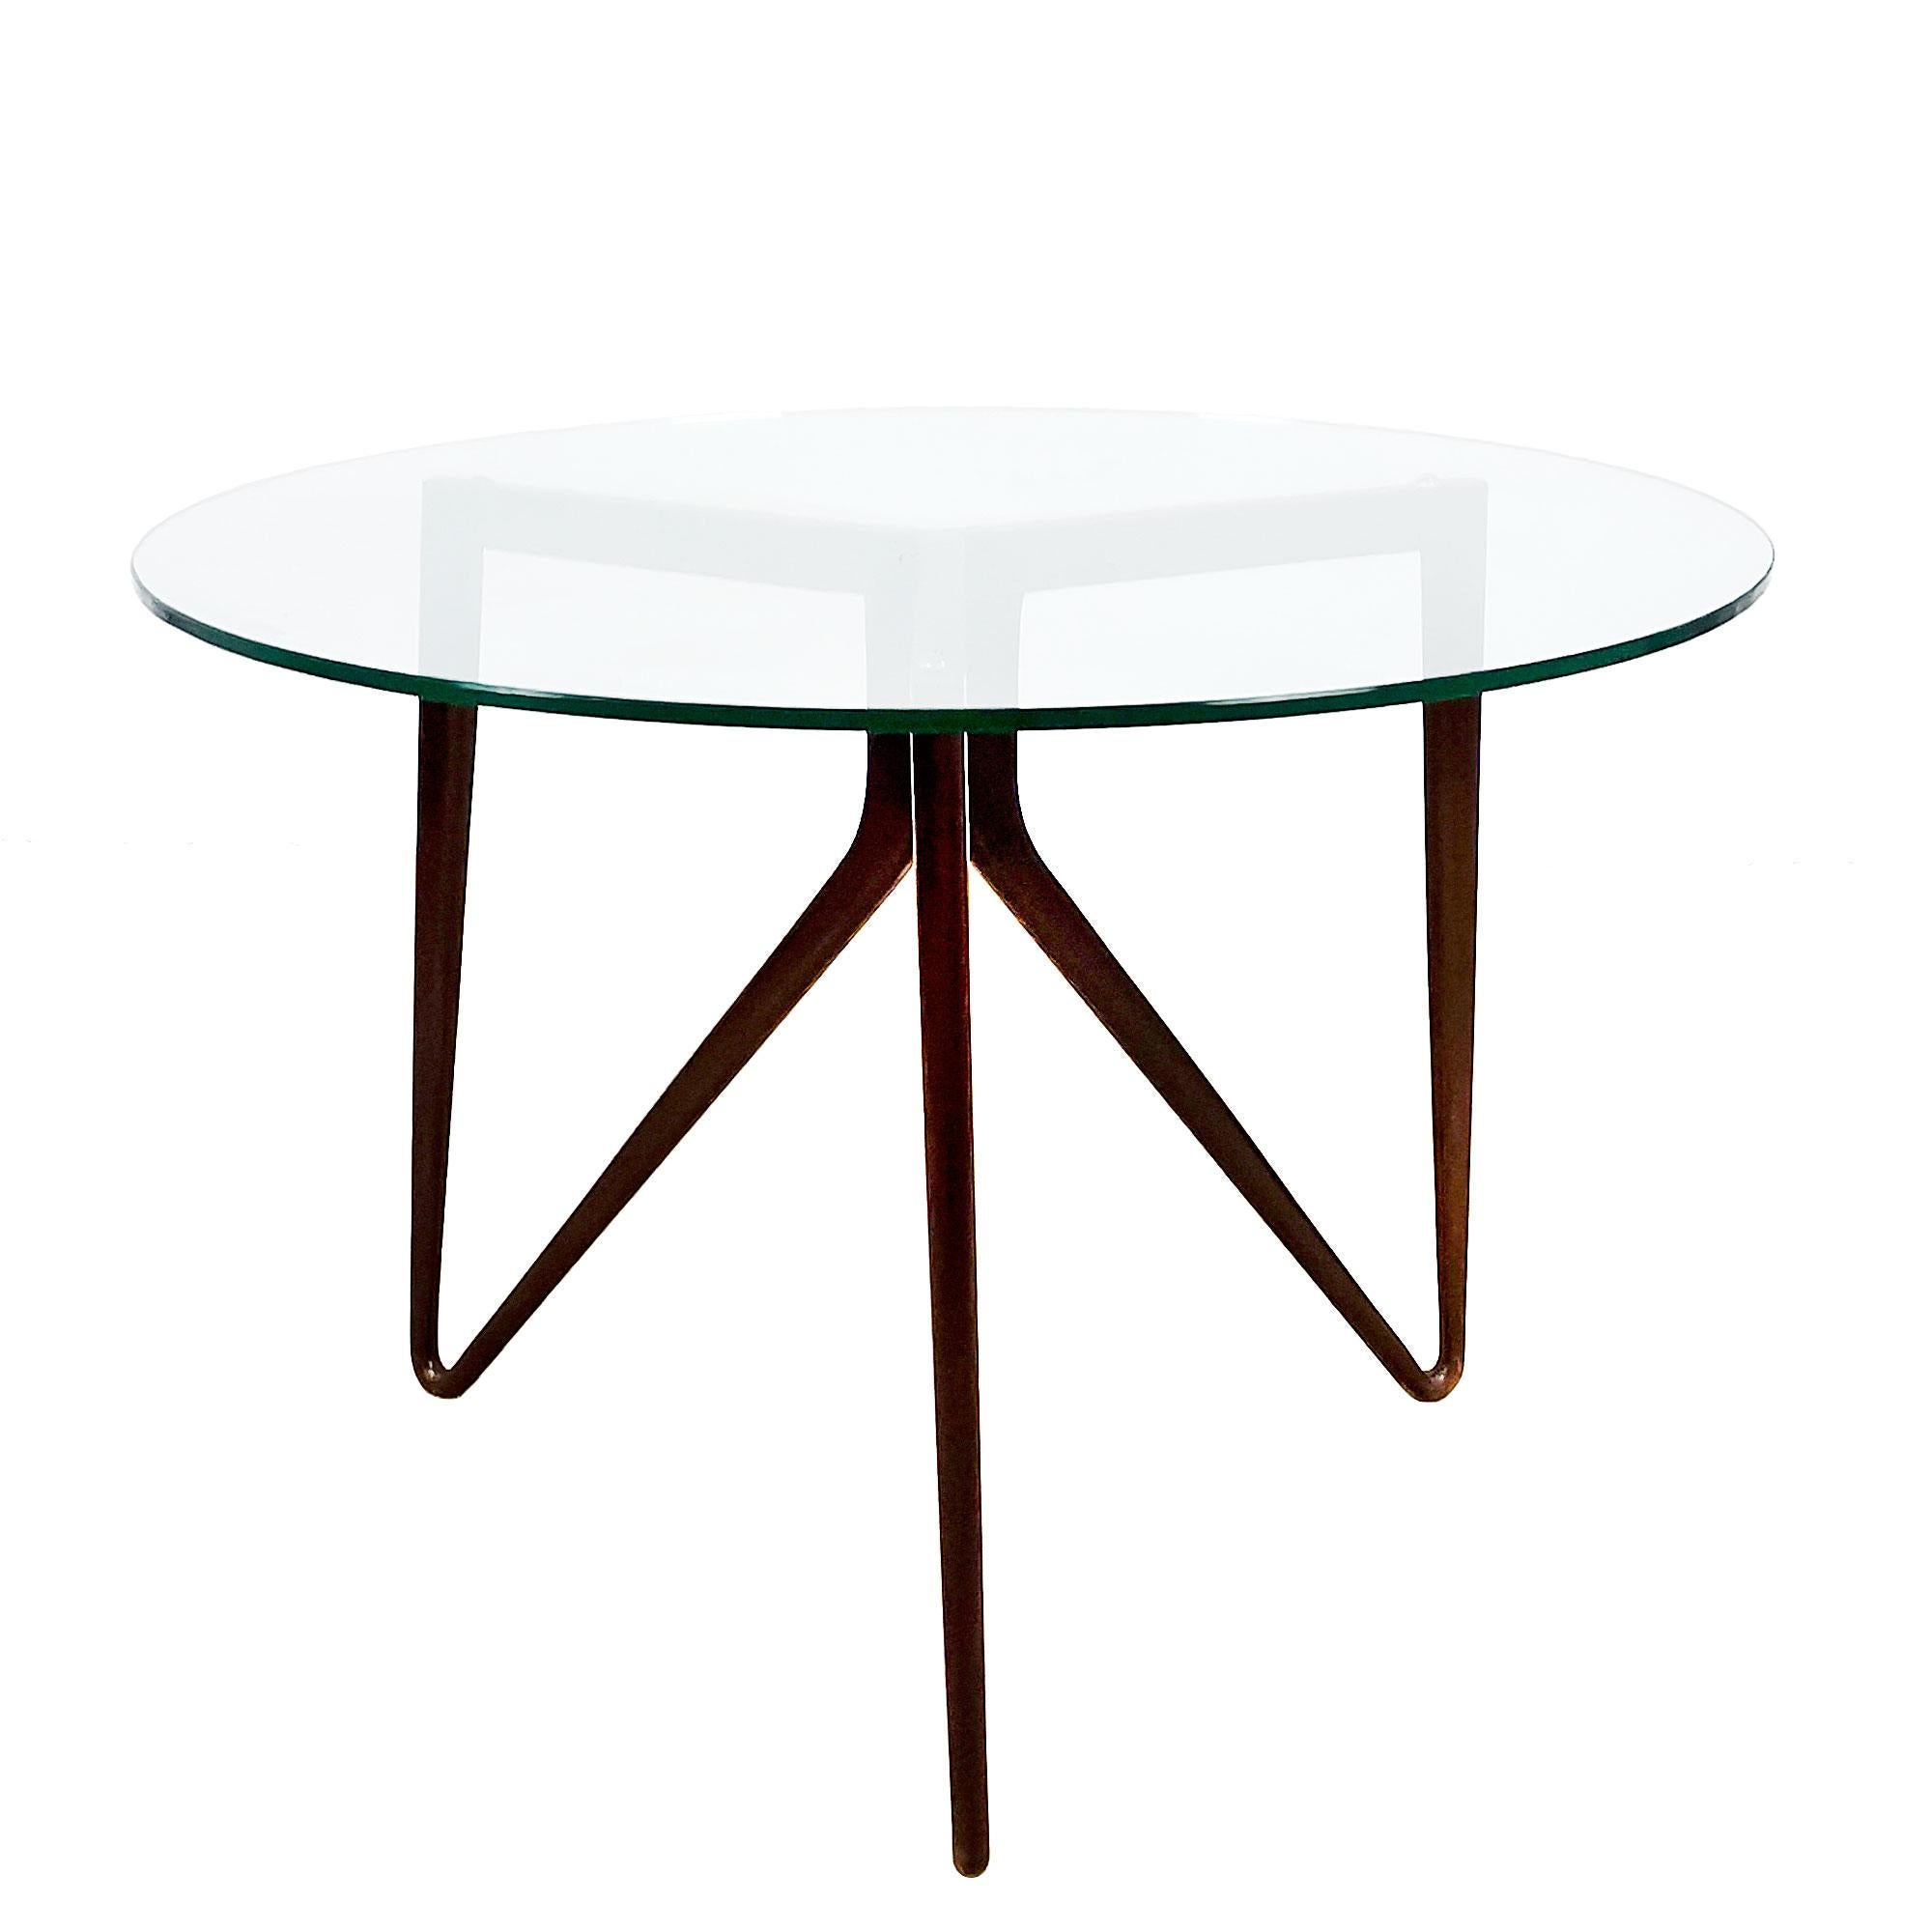 Italian Mid-Century Modern Round Tripod Sidetable, Solid Mahogany and Thick Glass- Italy For Sale